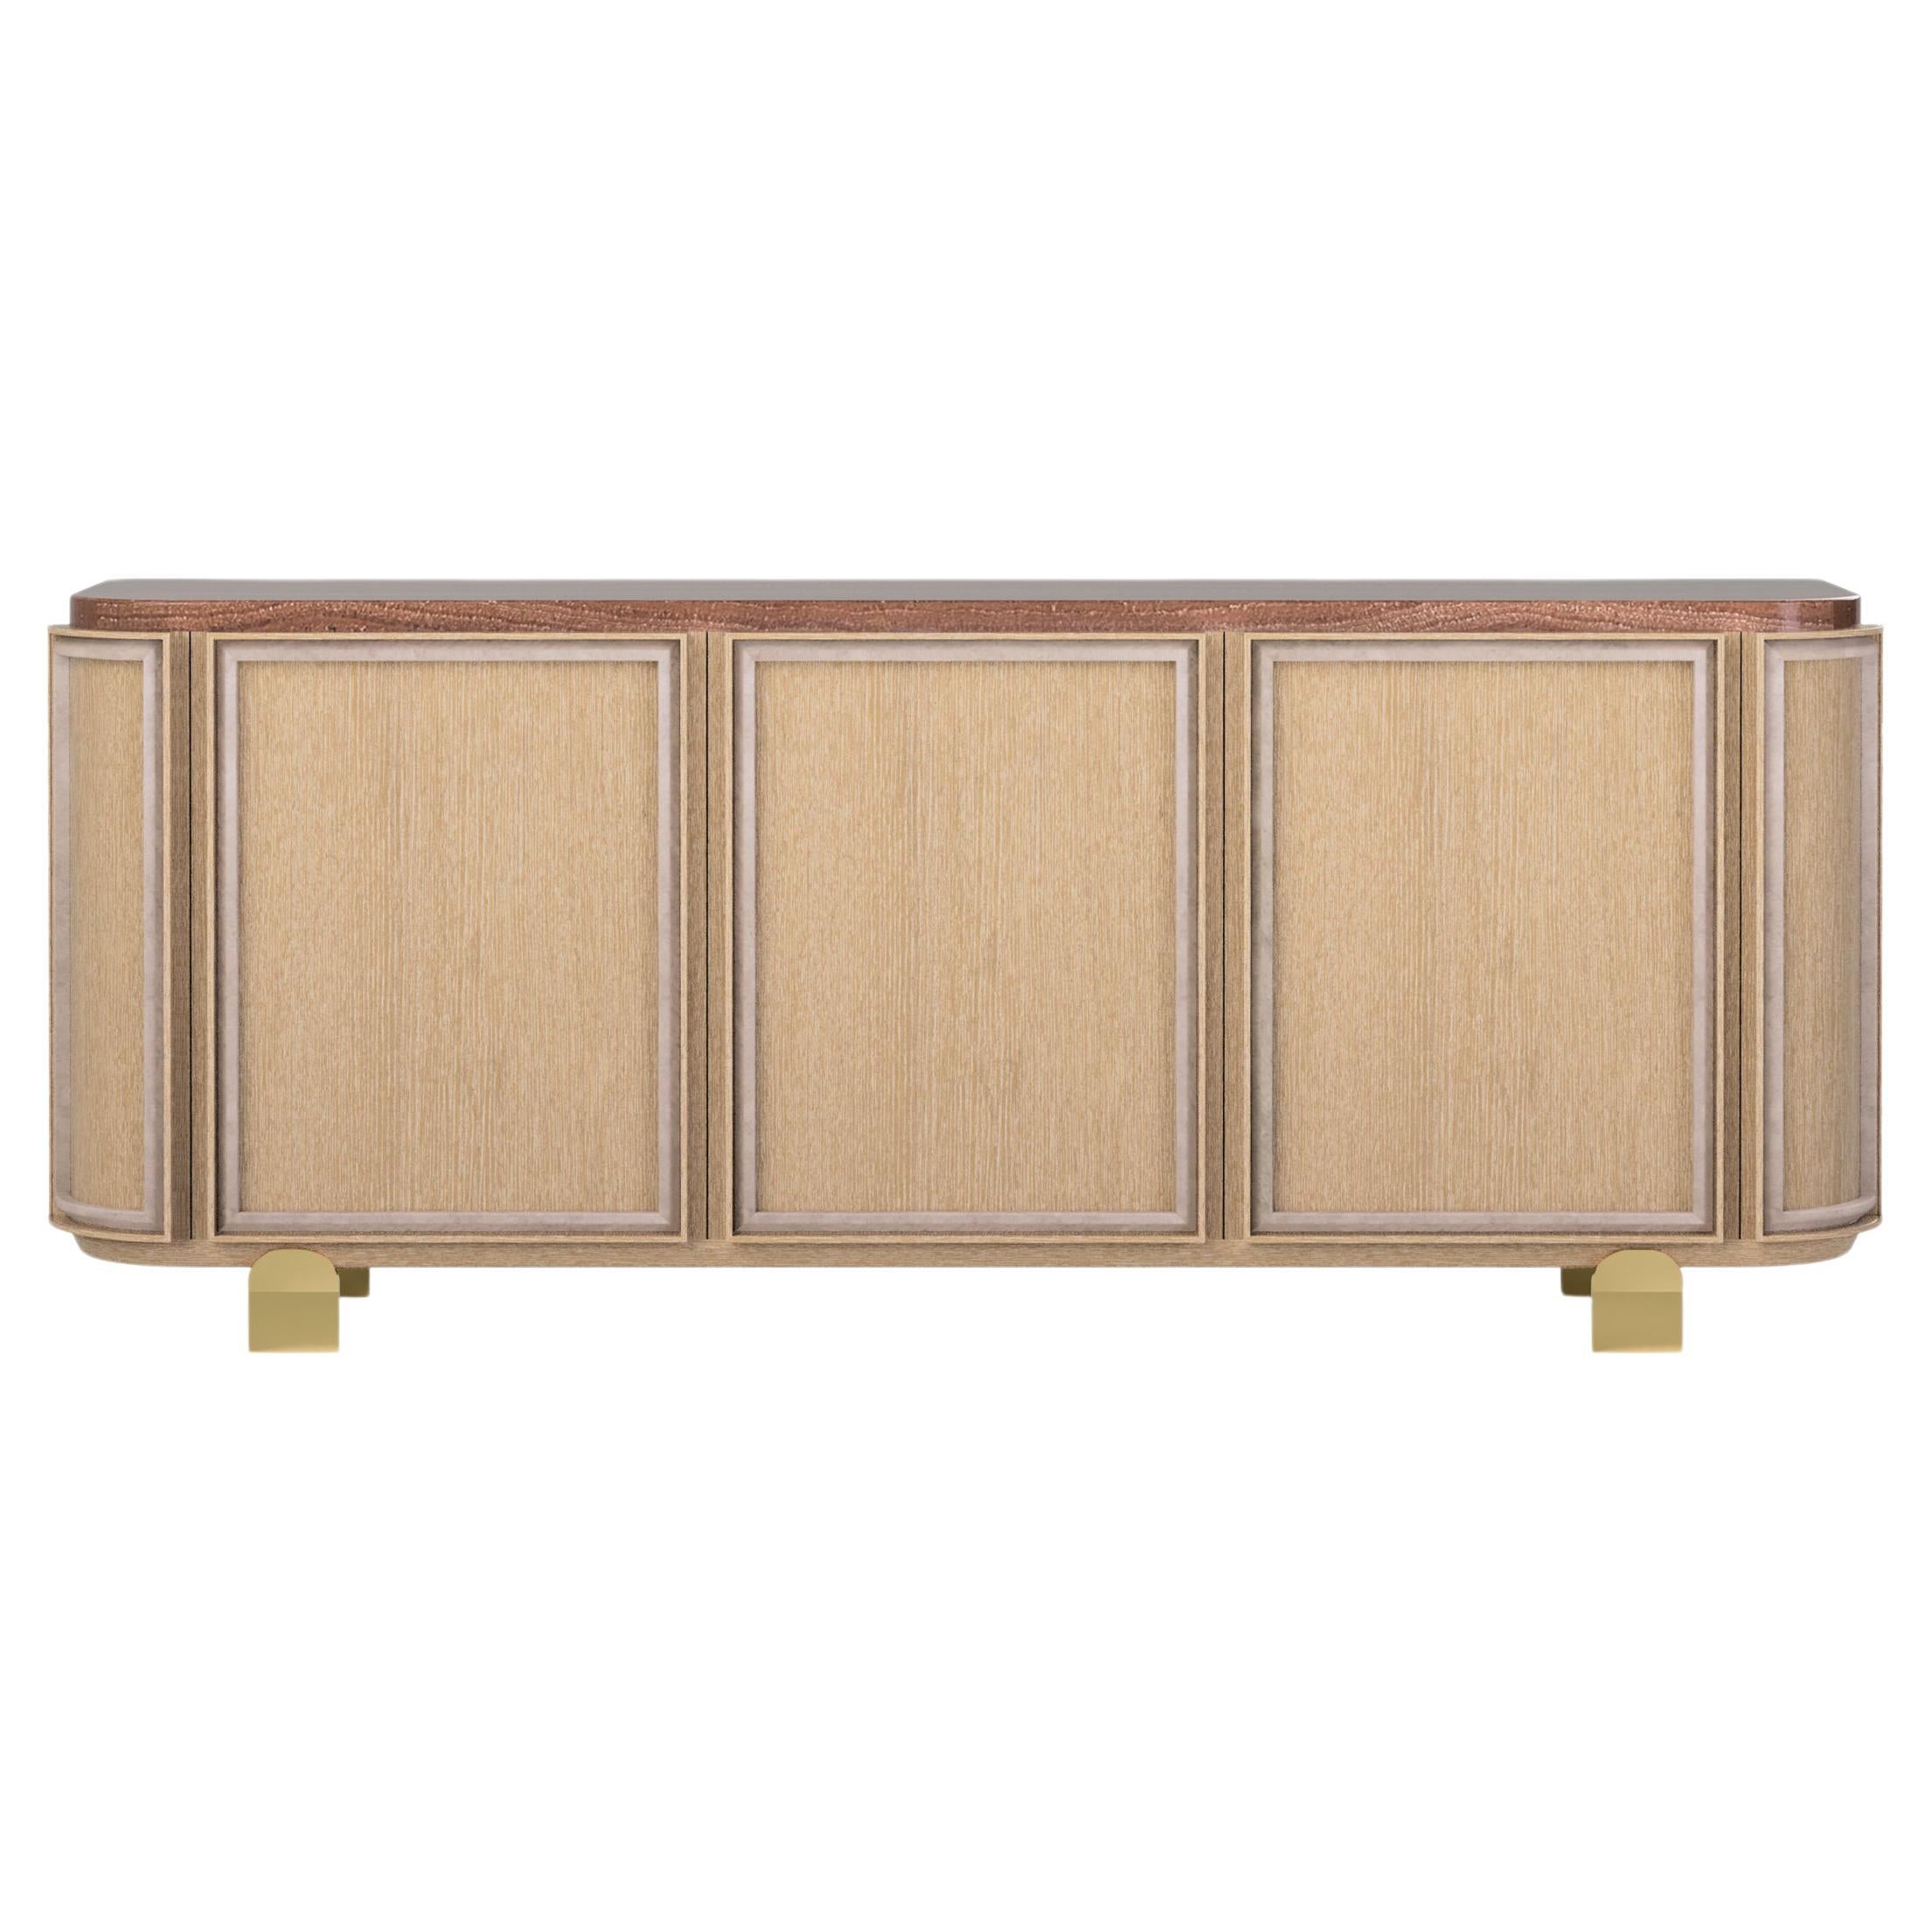  Credenza, Oak Body with Textured Lacquer Finish Details, Travertine Top 